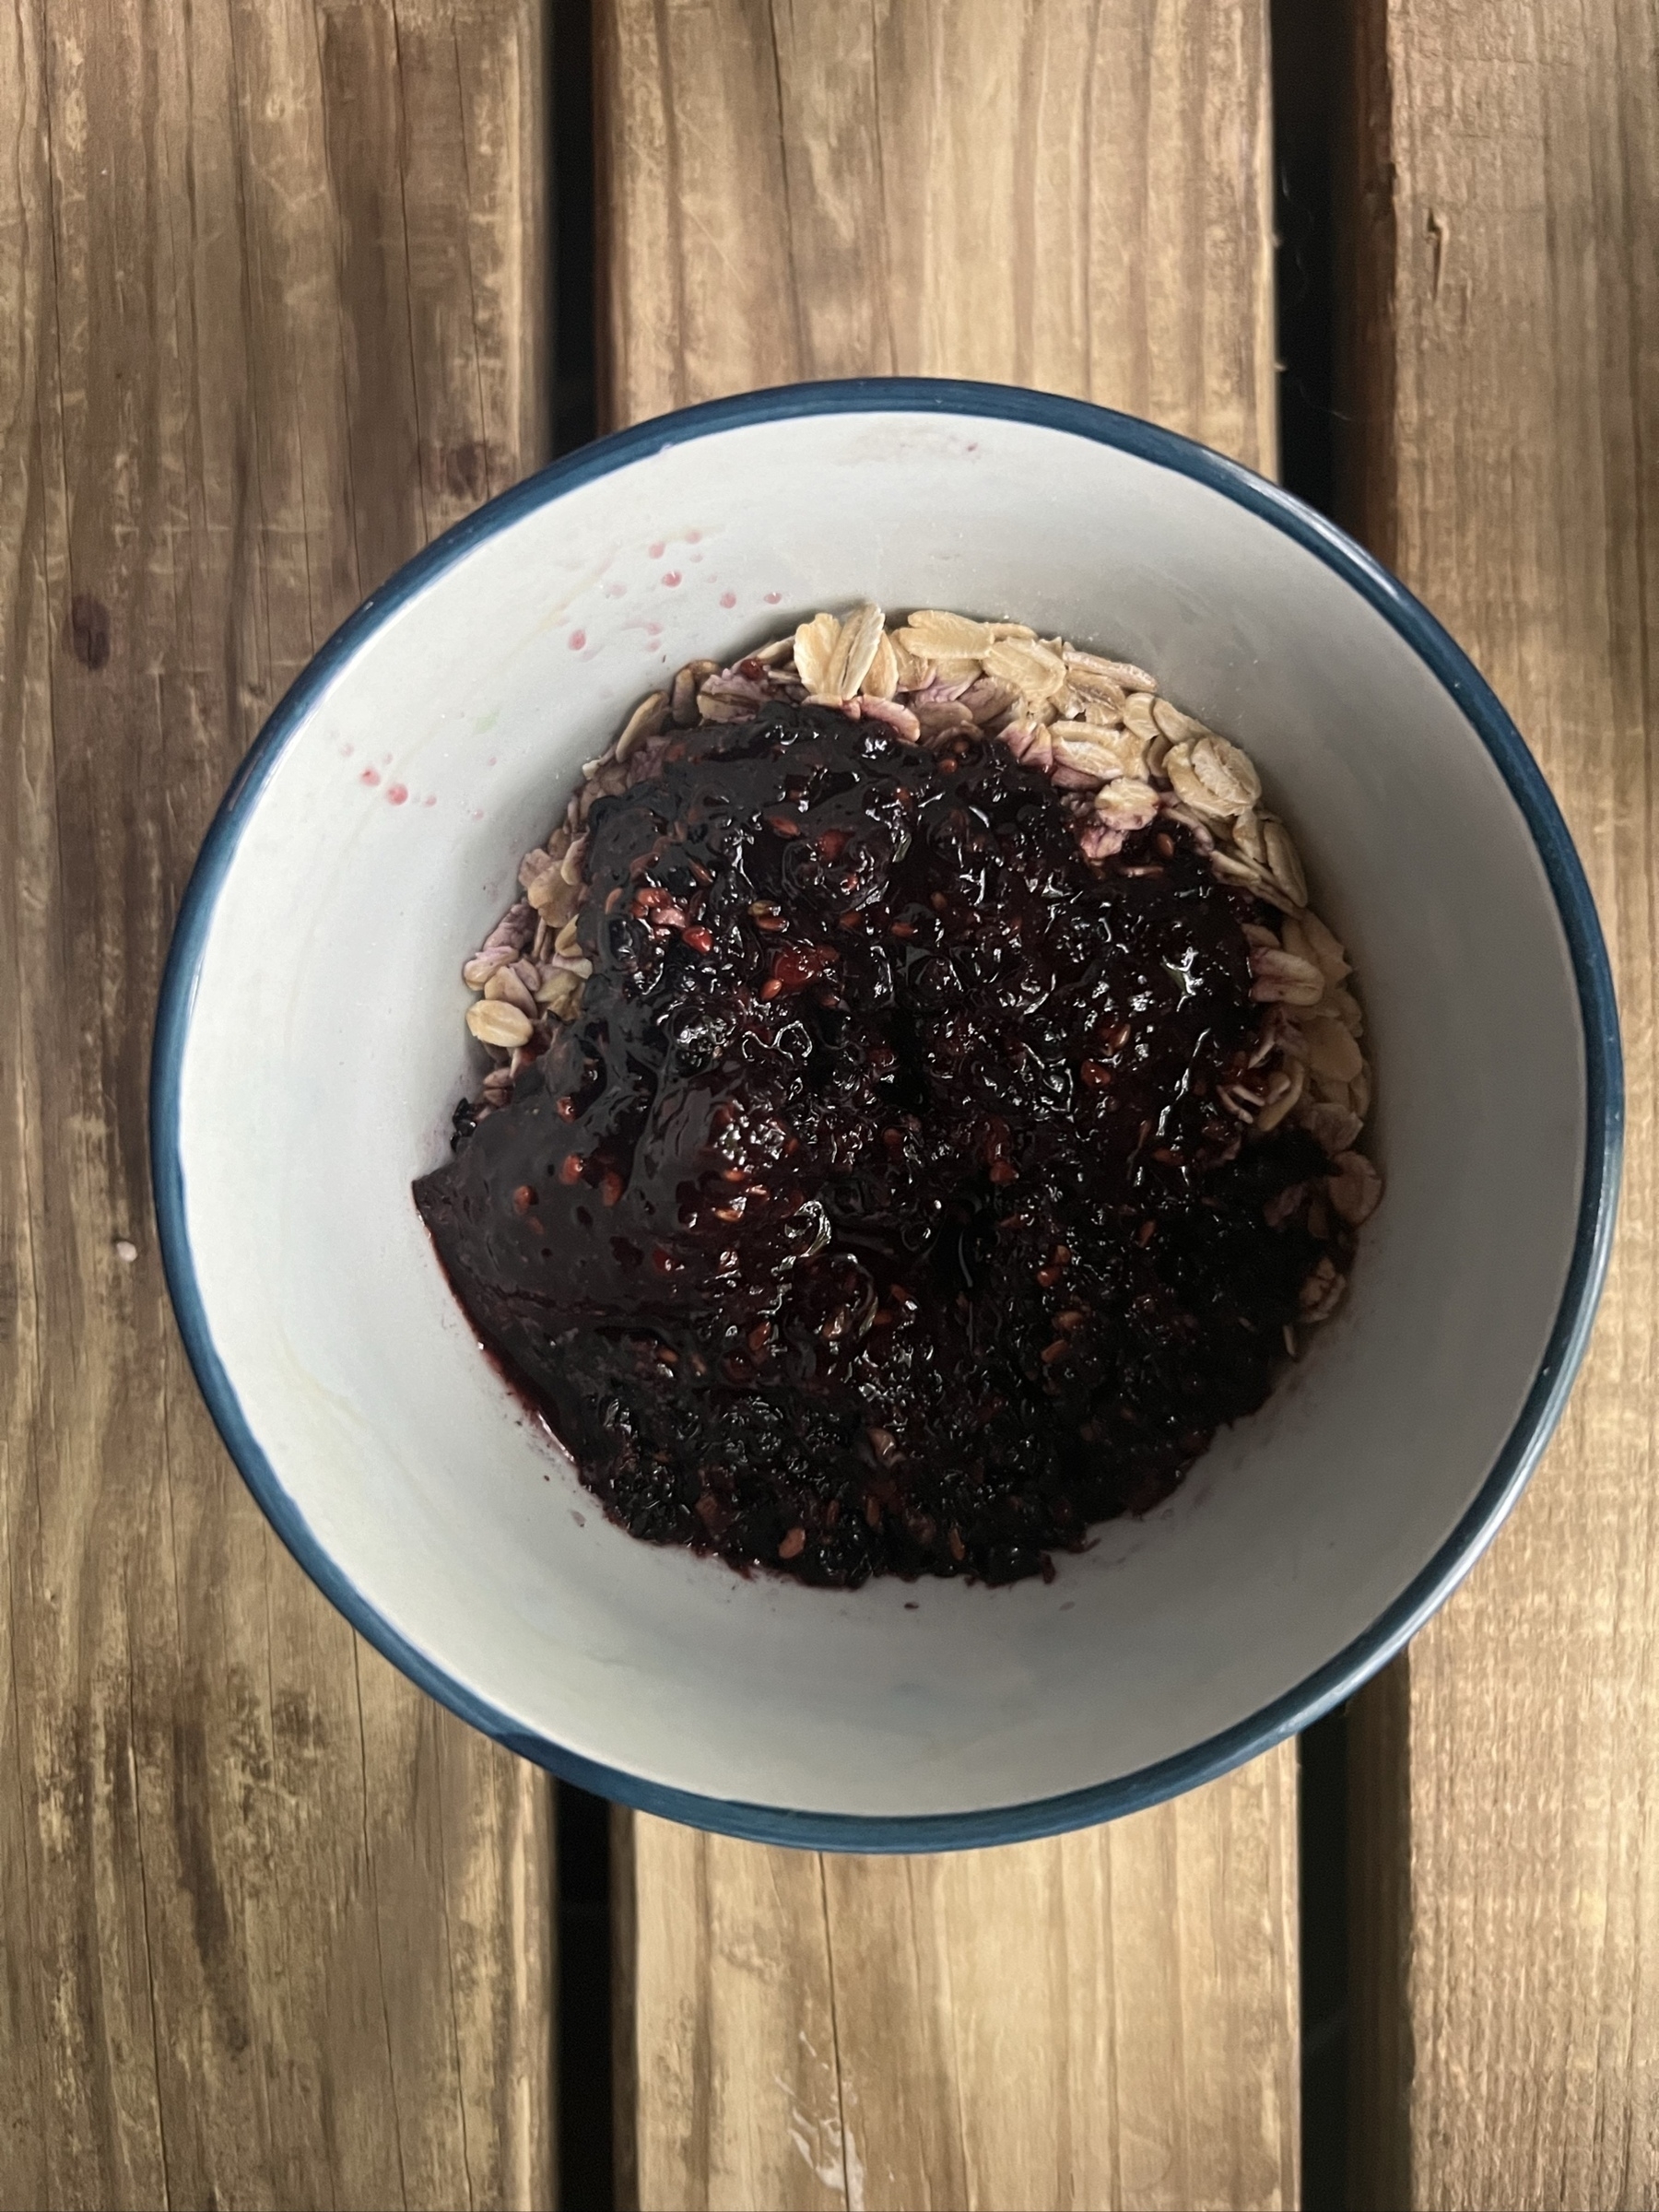 A bowl of uncooked oatmeal with a black-purple sauce of blended blackberries poured on top